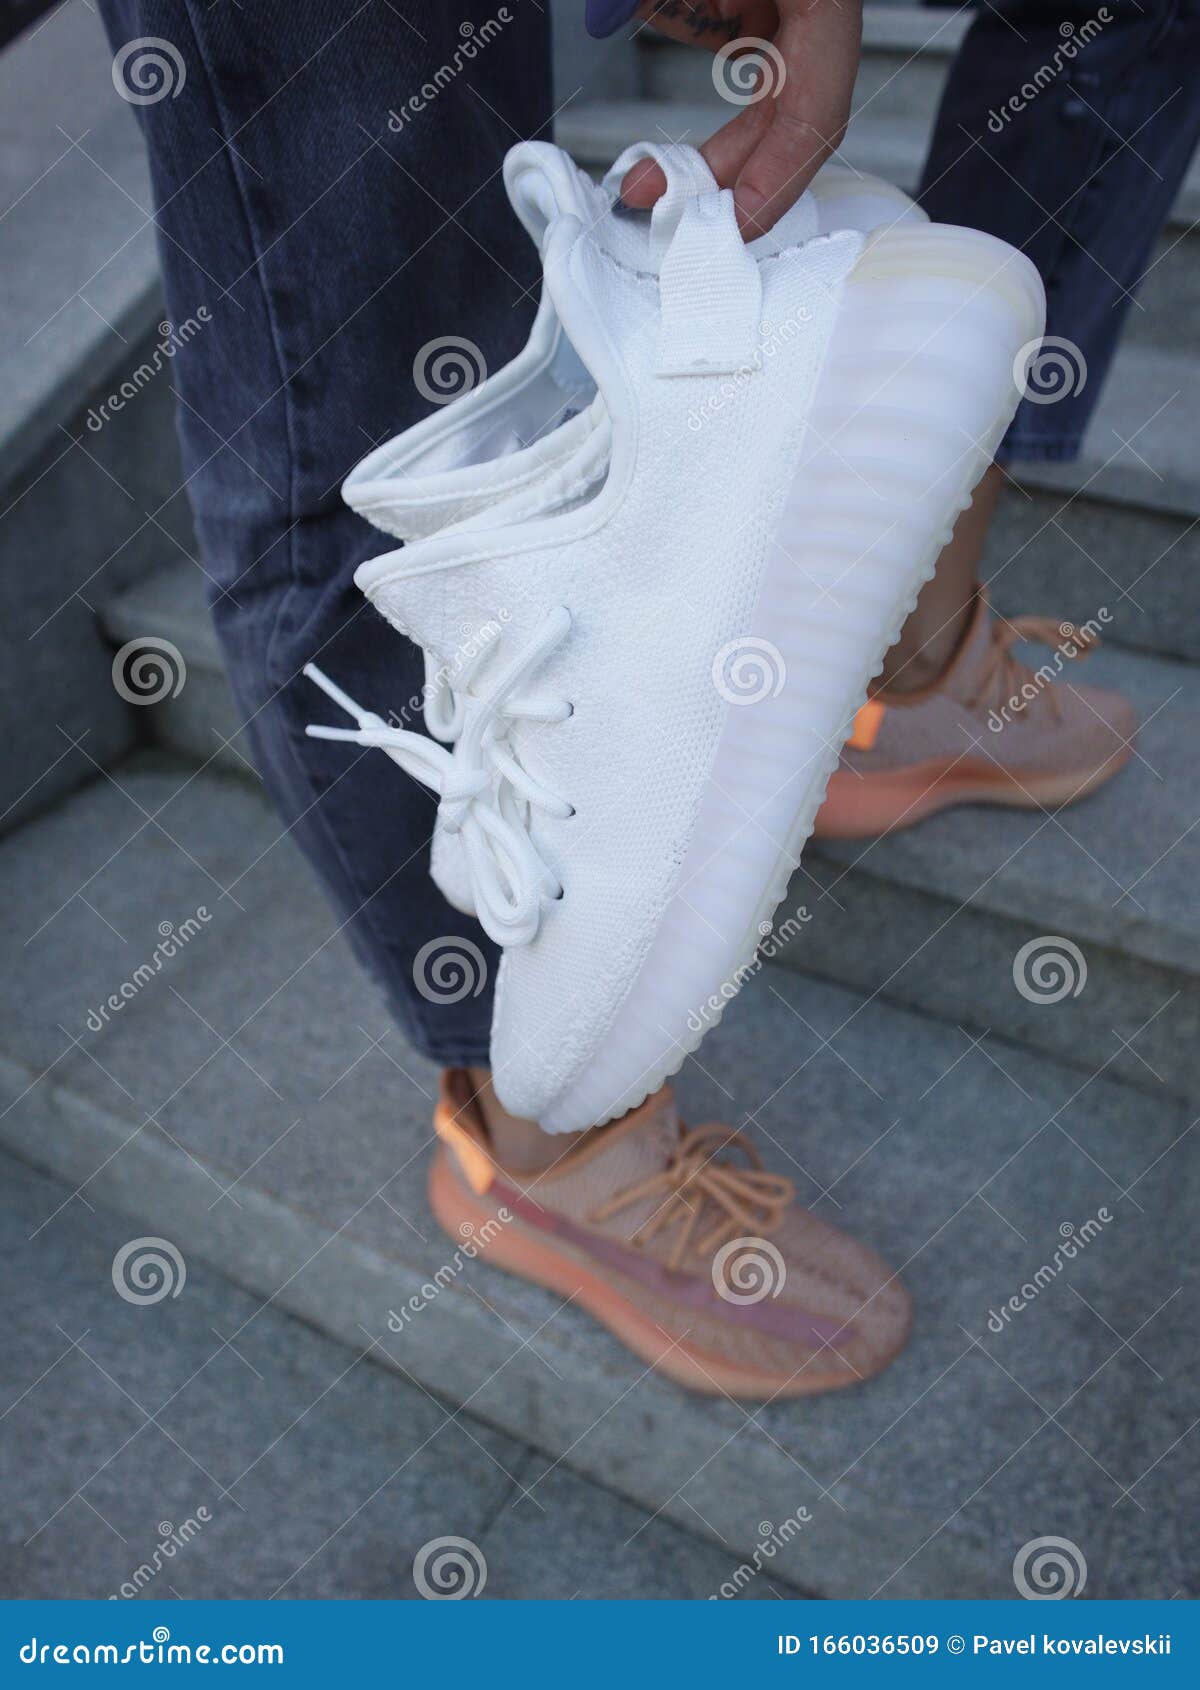 yeezy boost with jeans